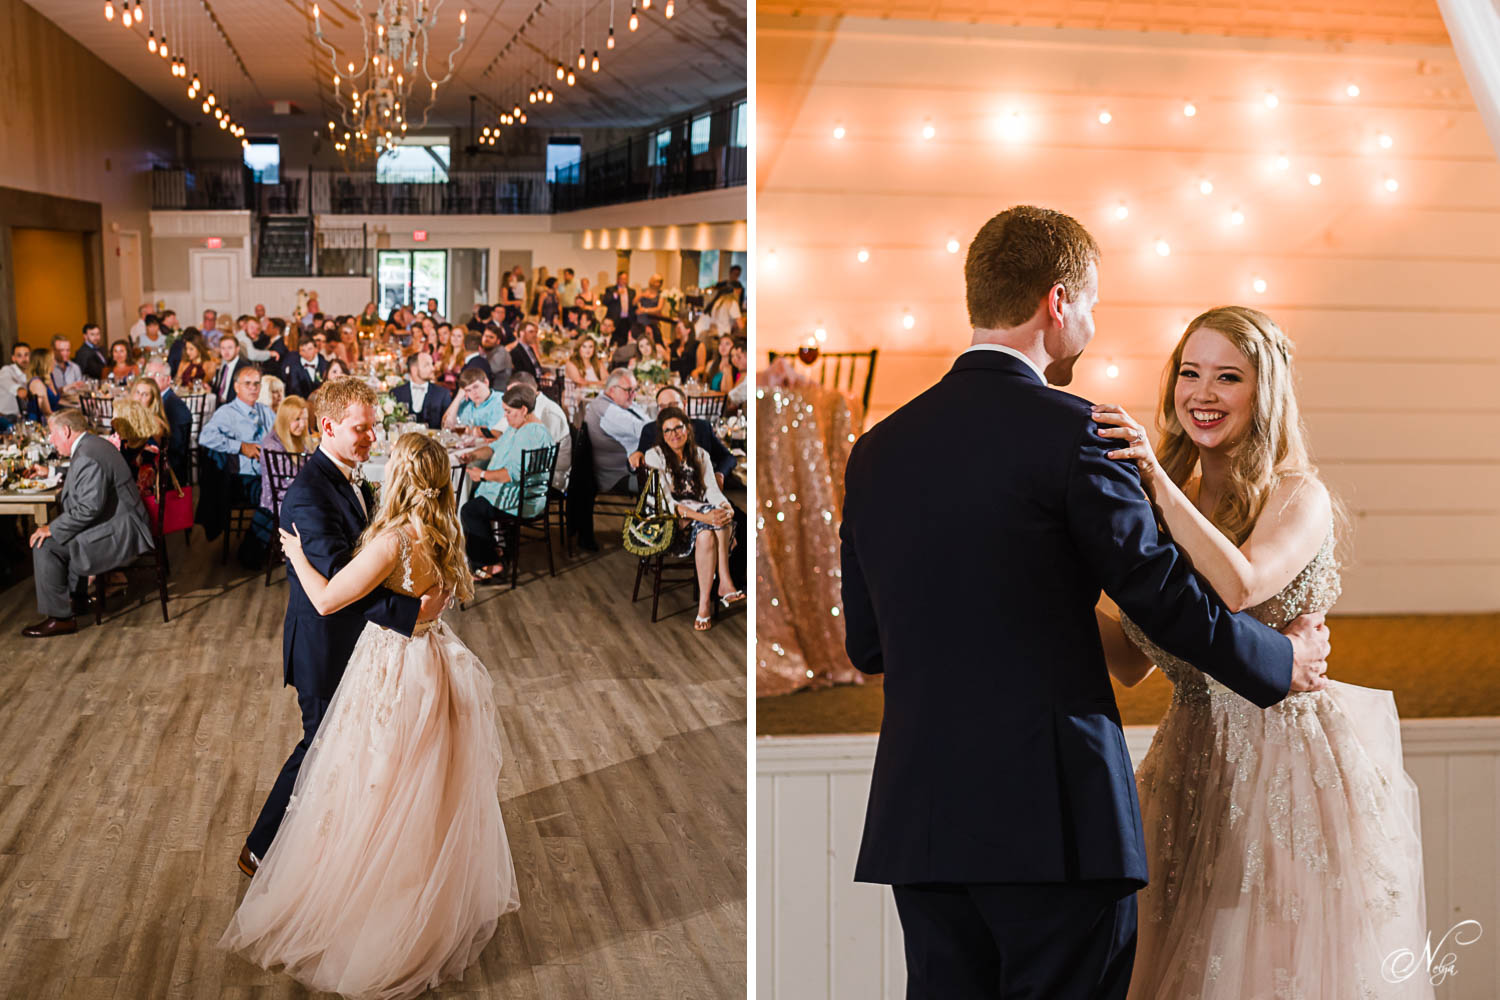 Bride and groom's first dance in front of their guests from New York and Alabama inside The Venue Chattanooga